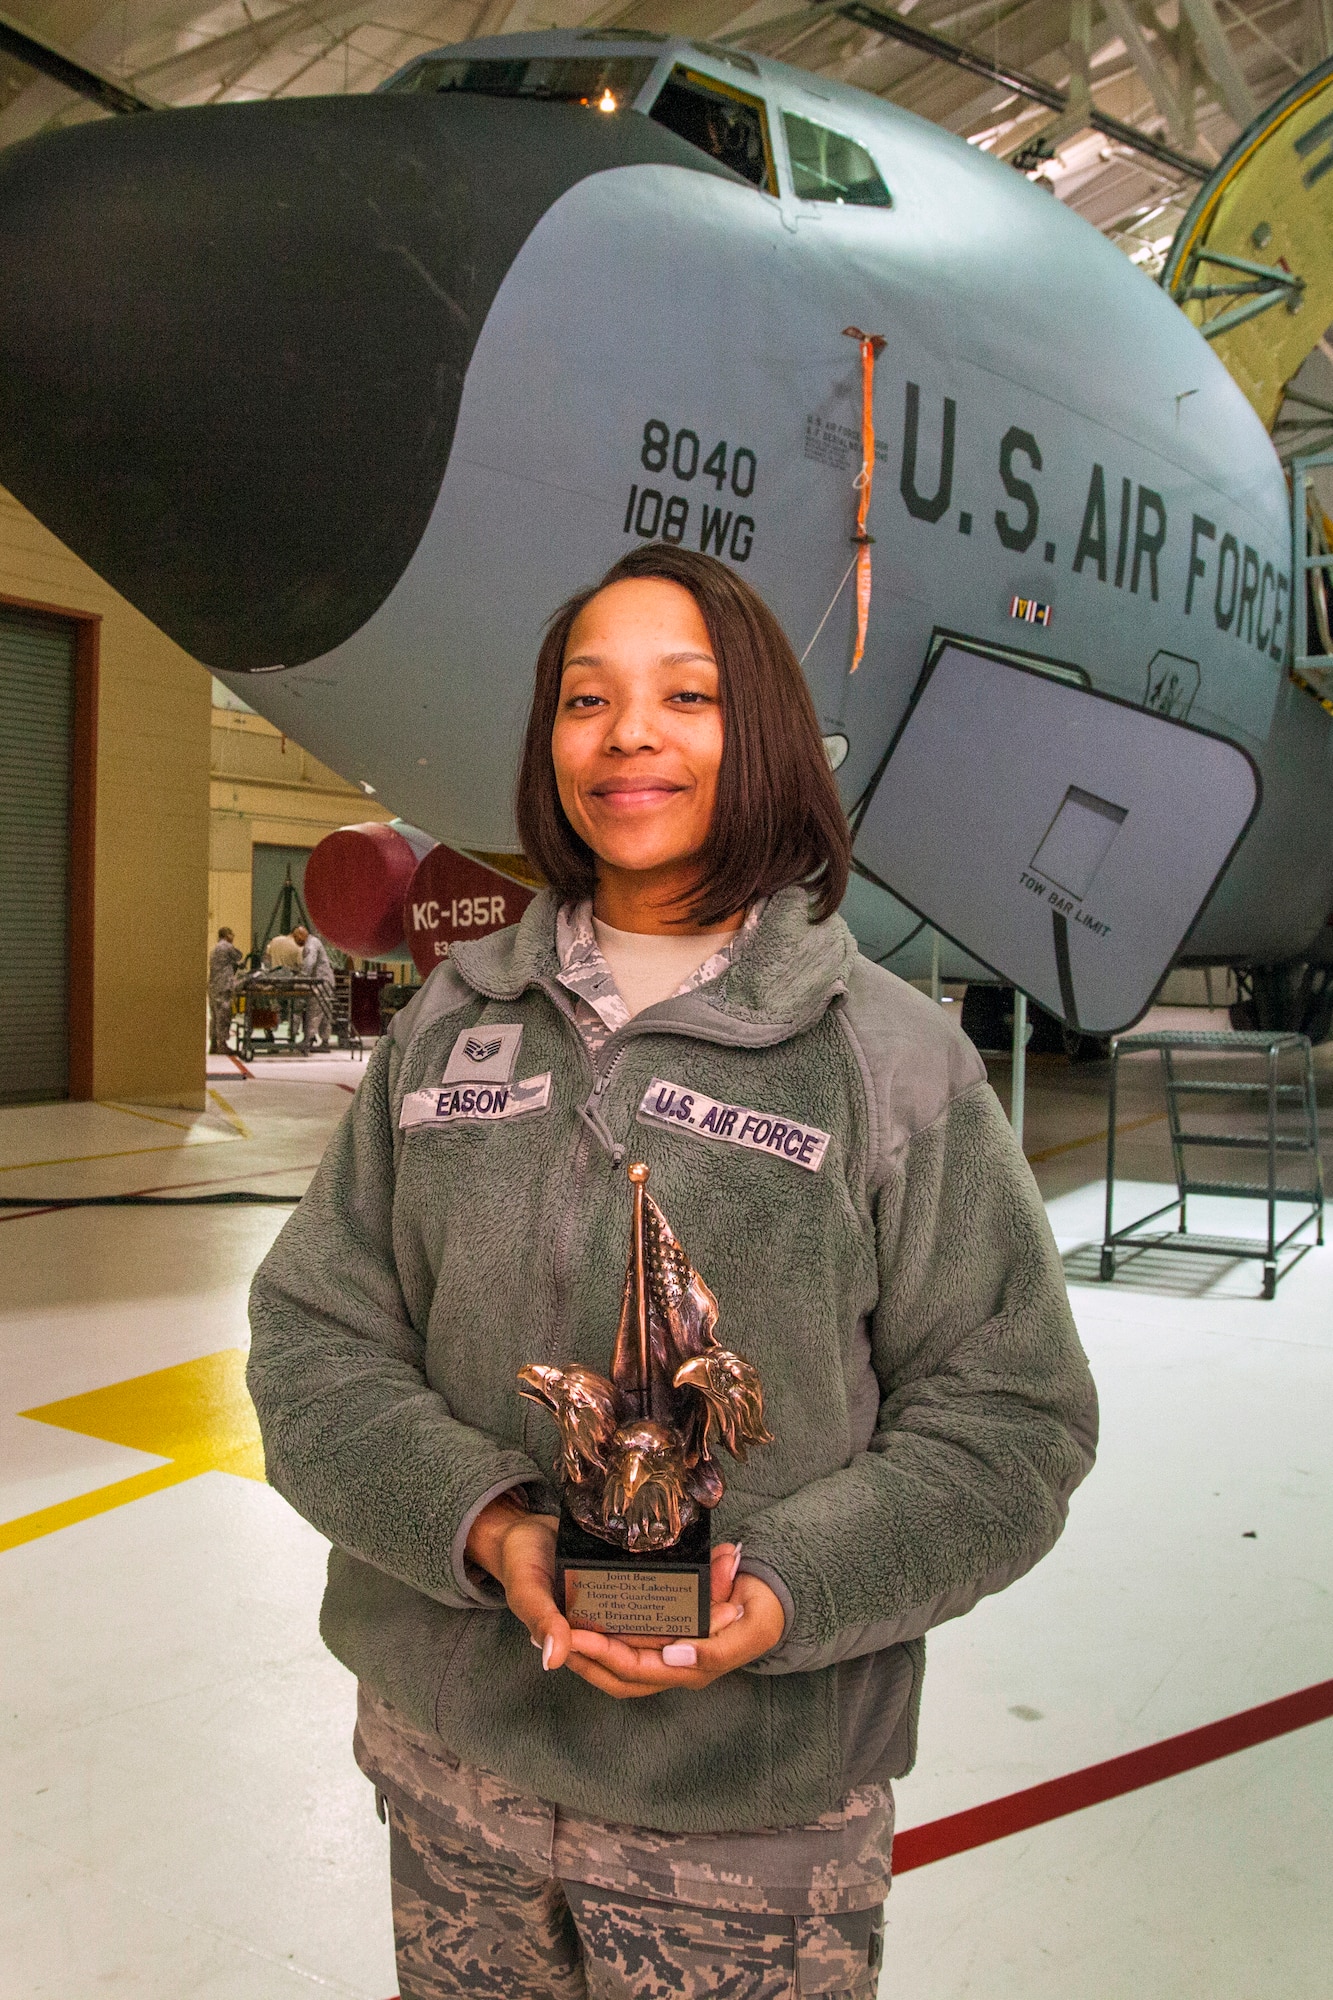 Staff Sgt. Brianna M. Eason, an orderly room clerk with the 108th Wing Maintenance Operations Flight, New Jersey Air National Guard, poses with Joint Base McGuire-Dix-Lakehurst Honor Guardsman of the Quarter, July – September 2015 trophy in front of a 108th Wing KC-135R Stratotanker at Joint Base McGuire-Dix-Lakehurst, N.J., March 14, 2016. Eason was chosen as the 87th Air Base Wing Honor Guard Member of the Year for January 2015 to December 2015. Eason serves as the Non-Commissioned Officer in Charge of training for the 87th ABW Honor Guard. (U.S. Air National Guard photo by Master Sgt. Mark C. Olsen/Released)